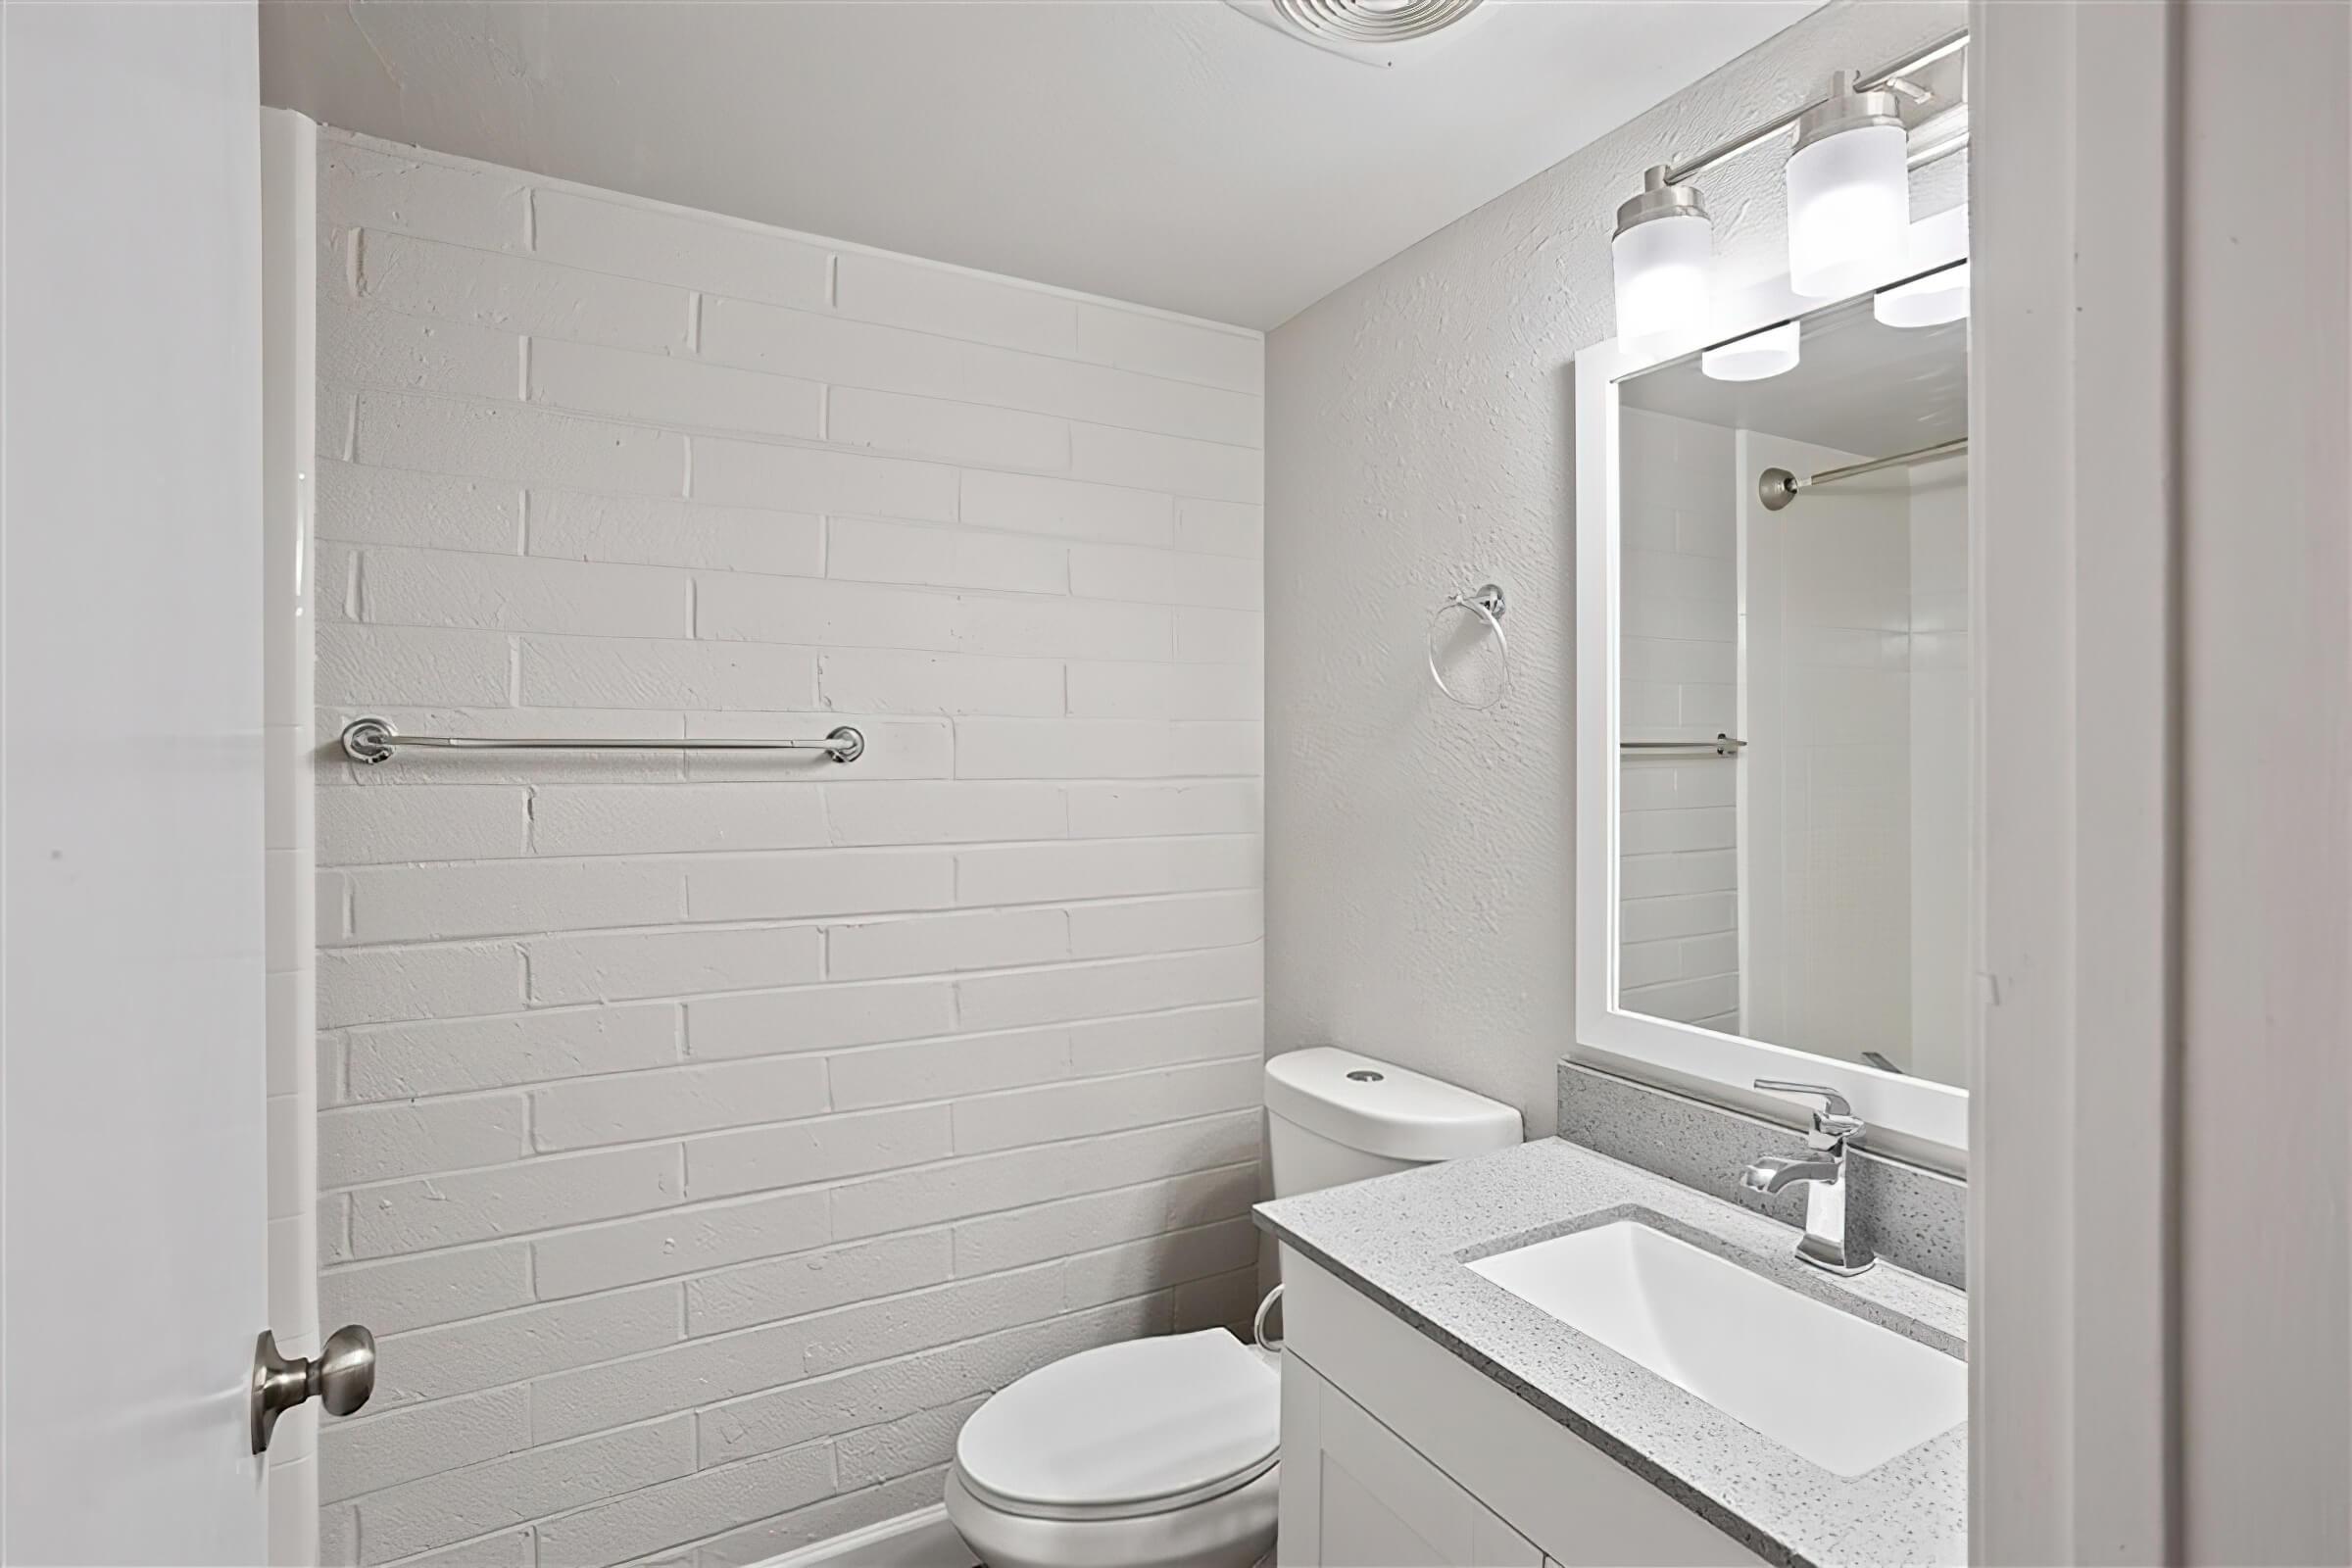 Modern renovated bathroom space with a brick wall, toilet, and grey mirrored vanity sink